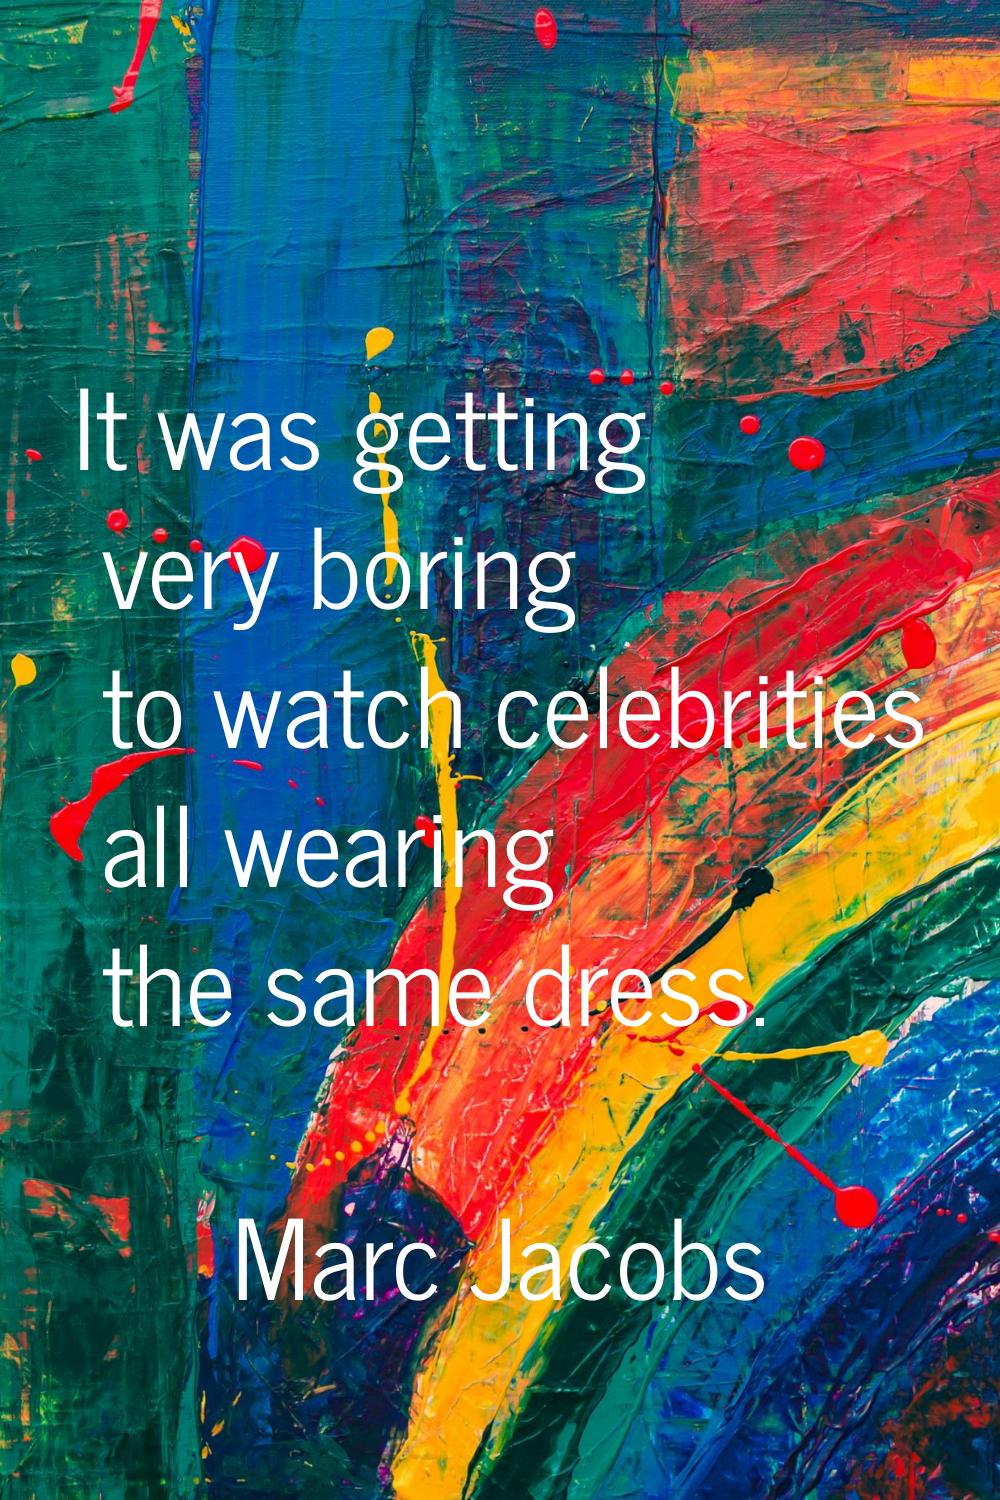 It was getting very boring to watch celebrities all wearing the same dress.